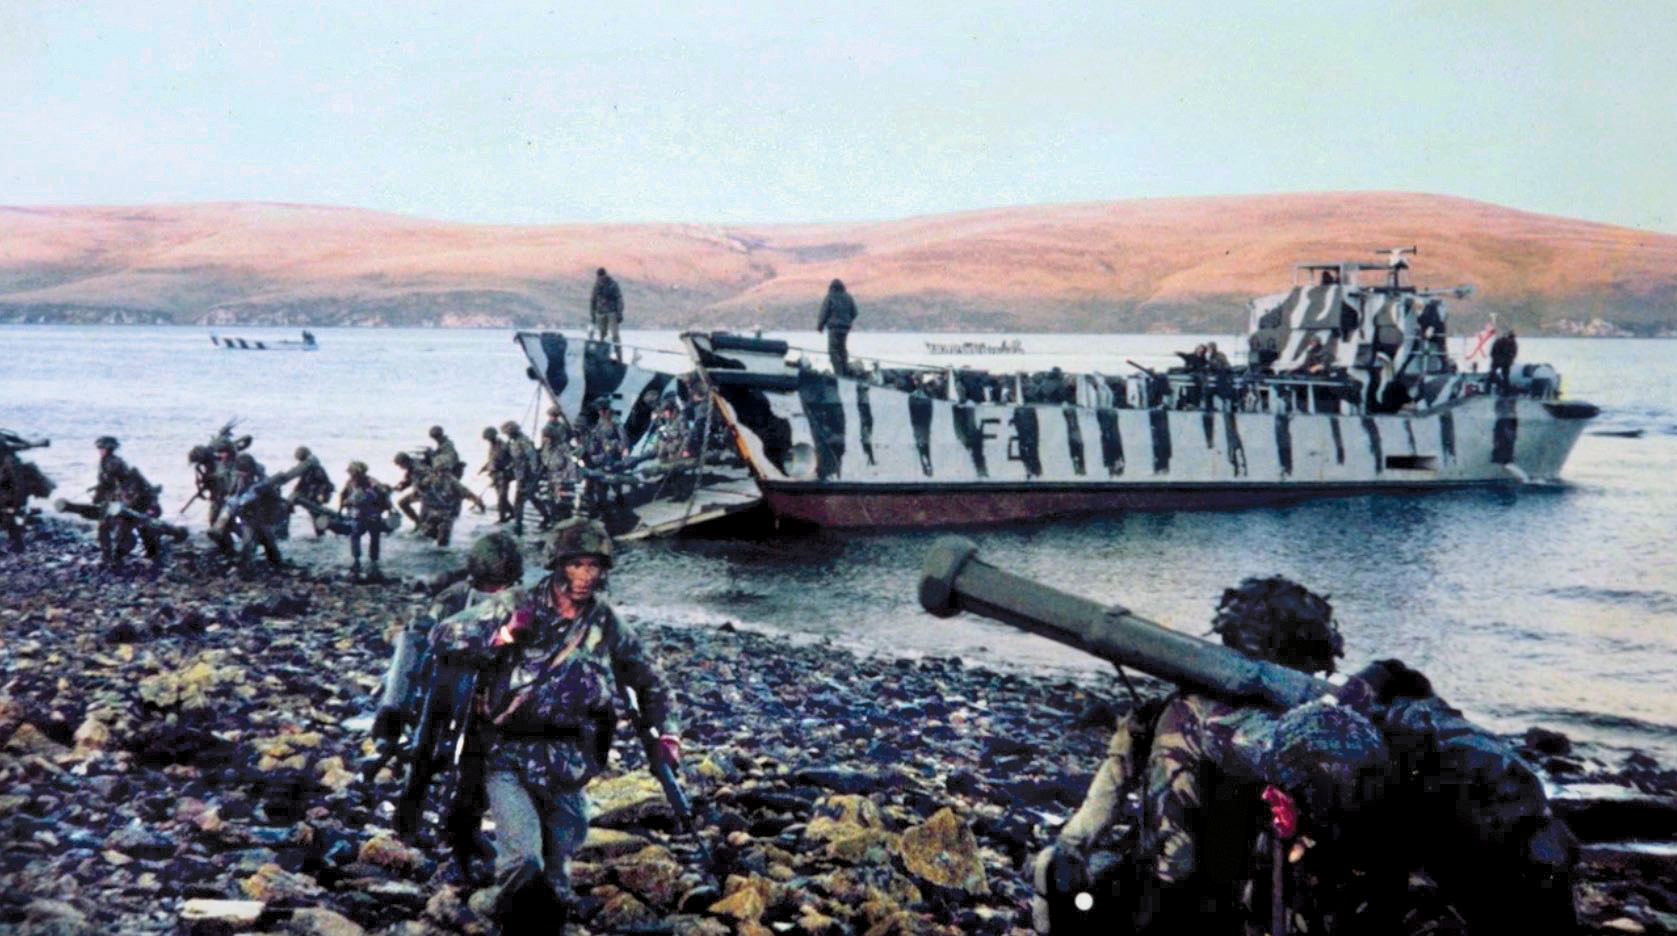 By June 10, British troops were in place on a line of hills west of the Argentine defenses surrounding Port Stanley. No. 3 Parachute Regiment, shown disembarking from a landing craft at San Carlos, attacked from the west.